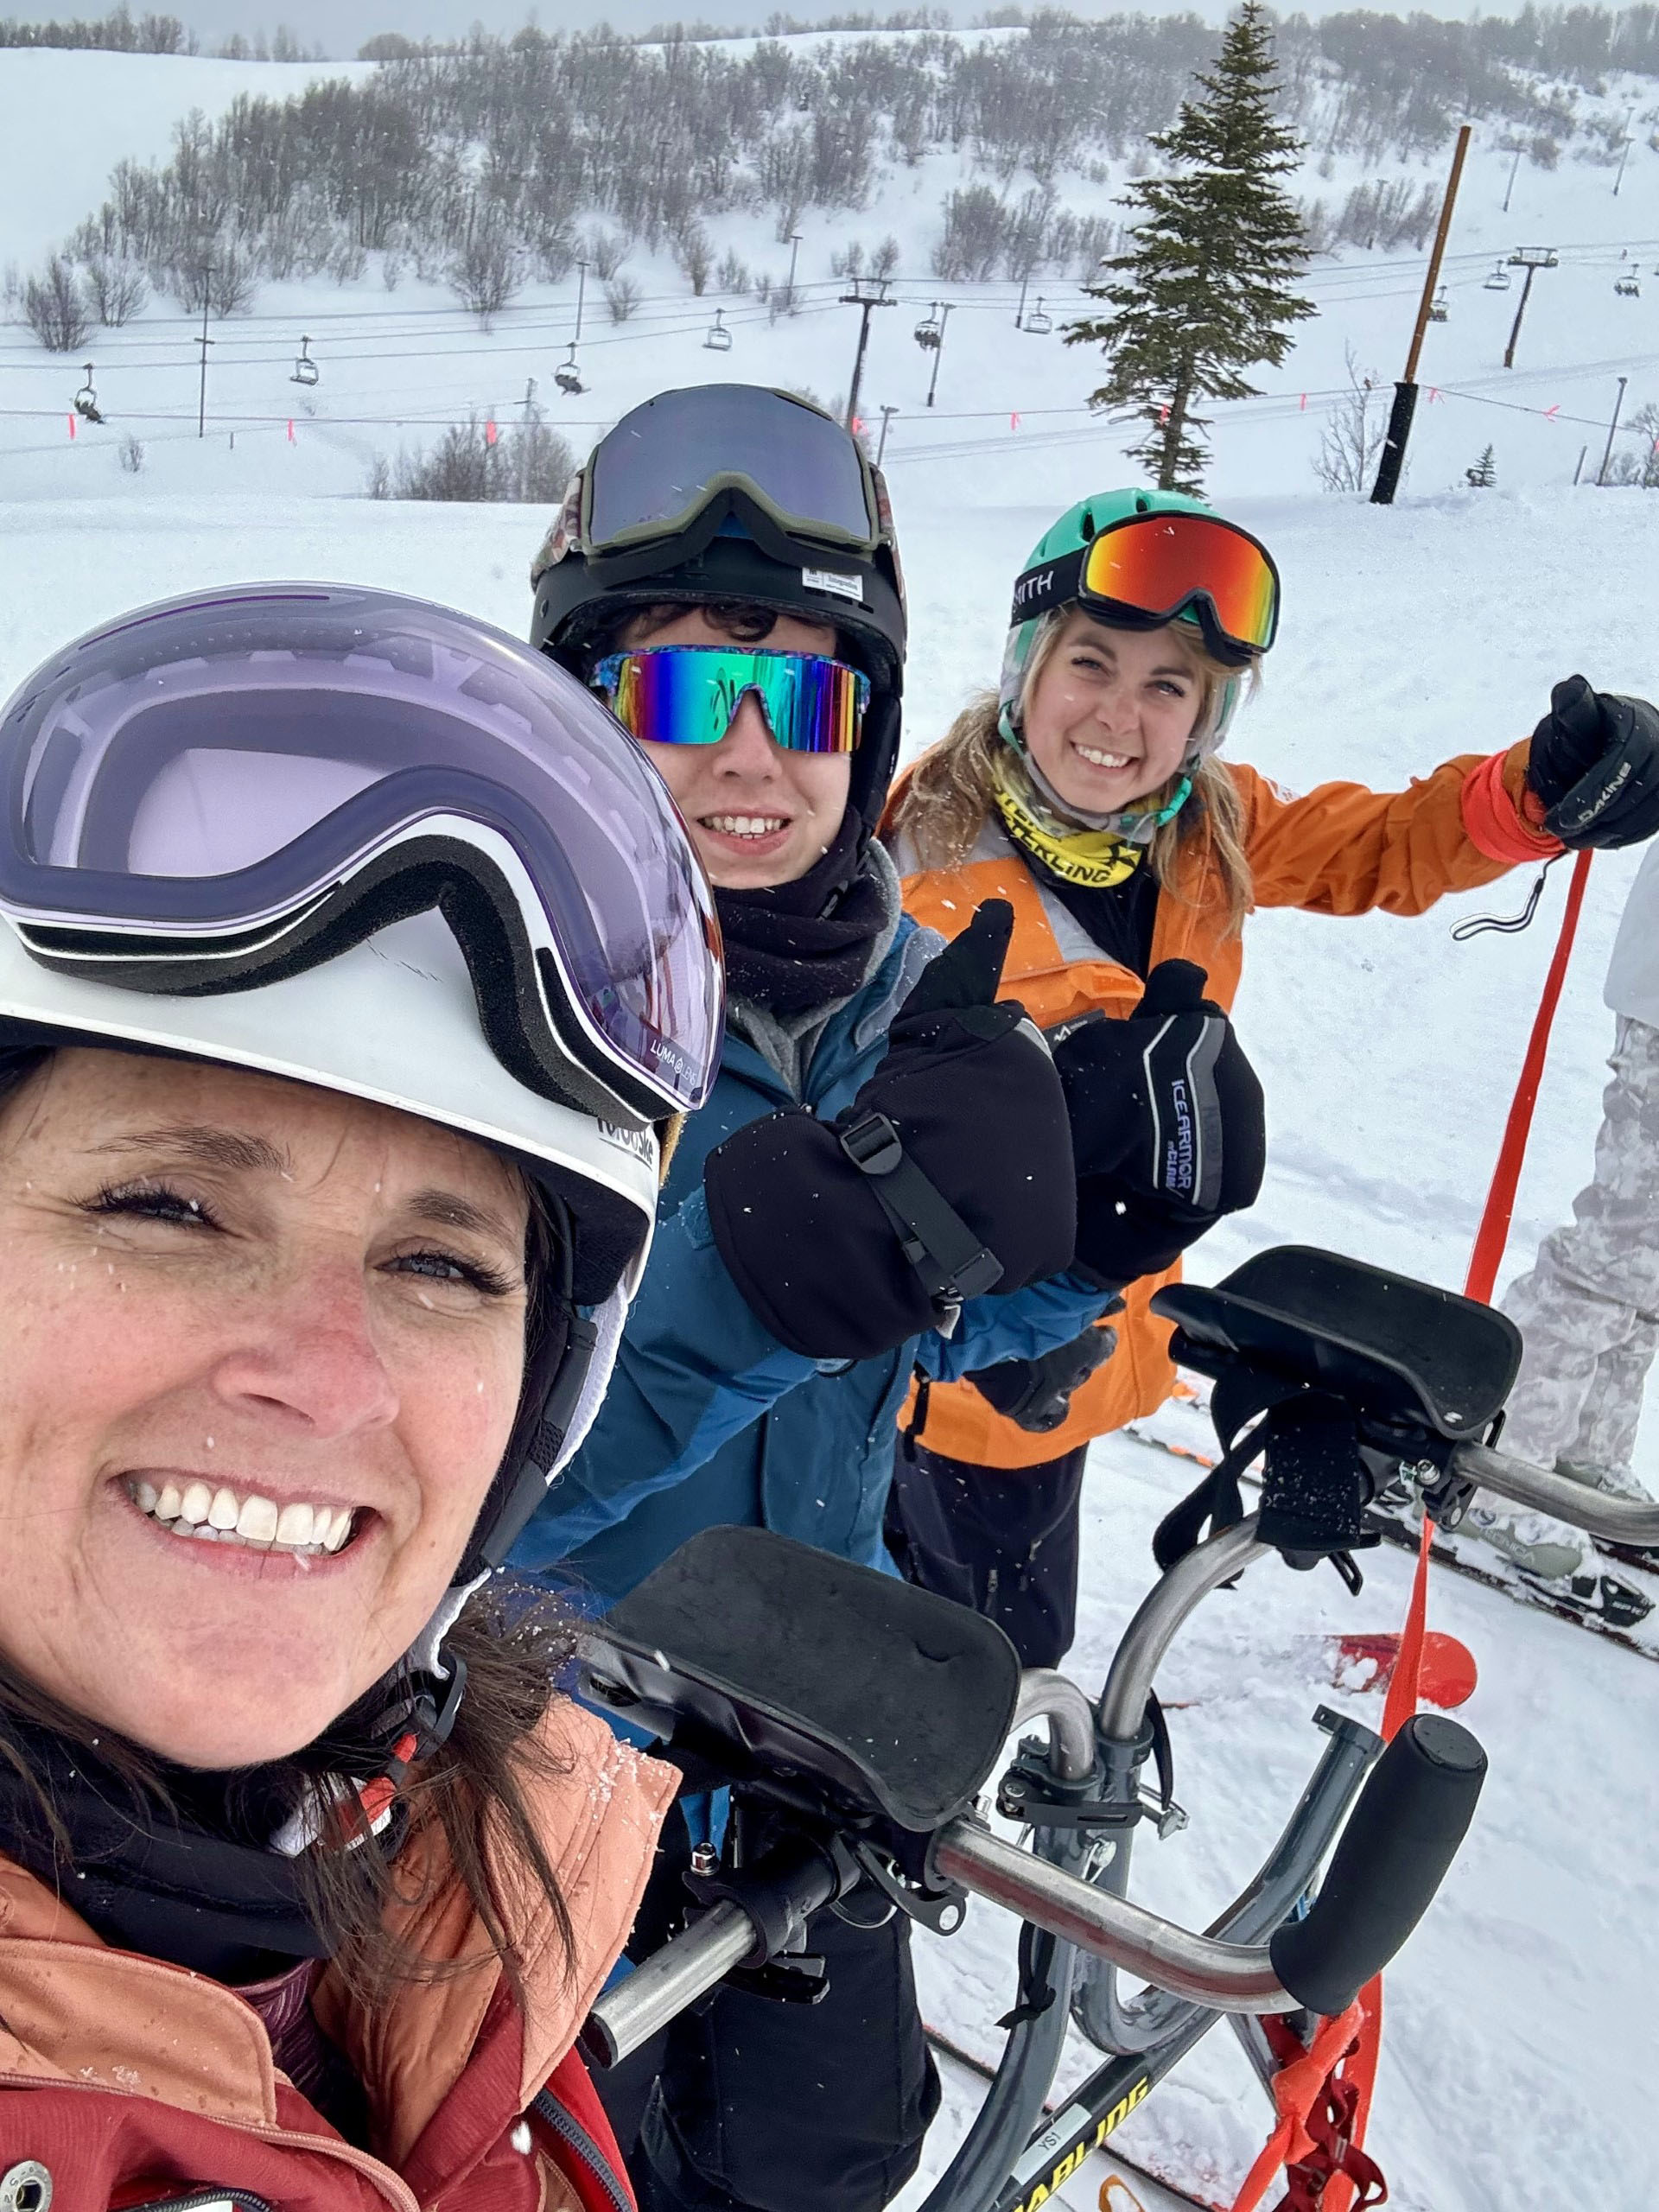 Emma, Kelly, and Jack on a snowy mountain 